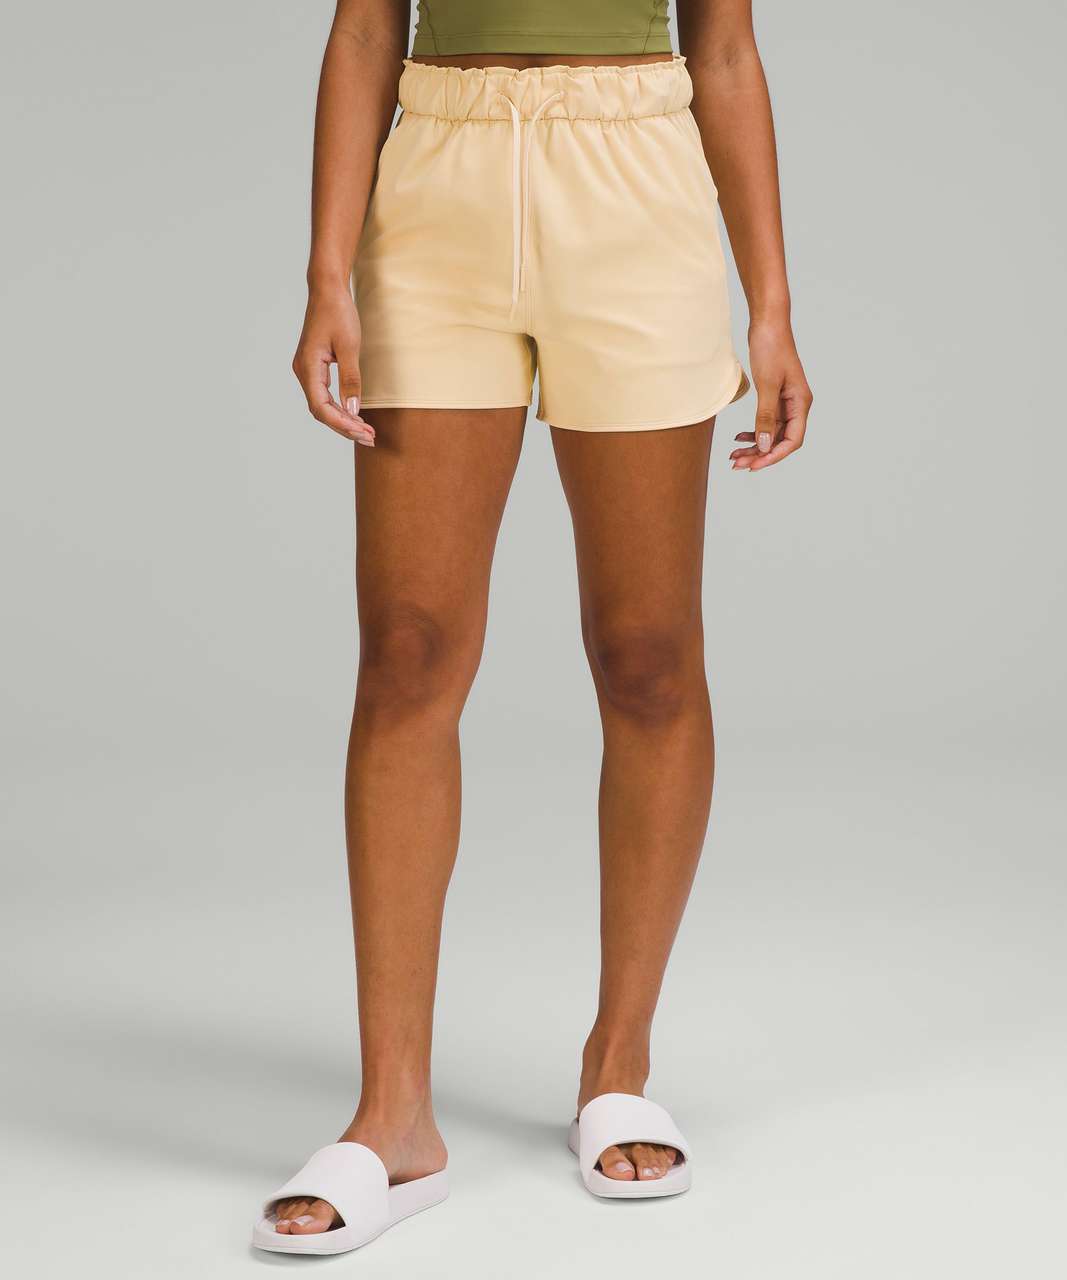 Lululemon Stretch Luxtreme High-Rise Short 3.5" - Prosecco